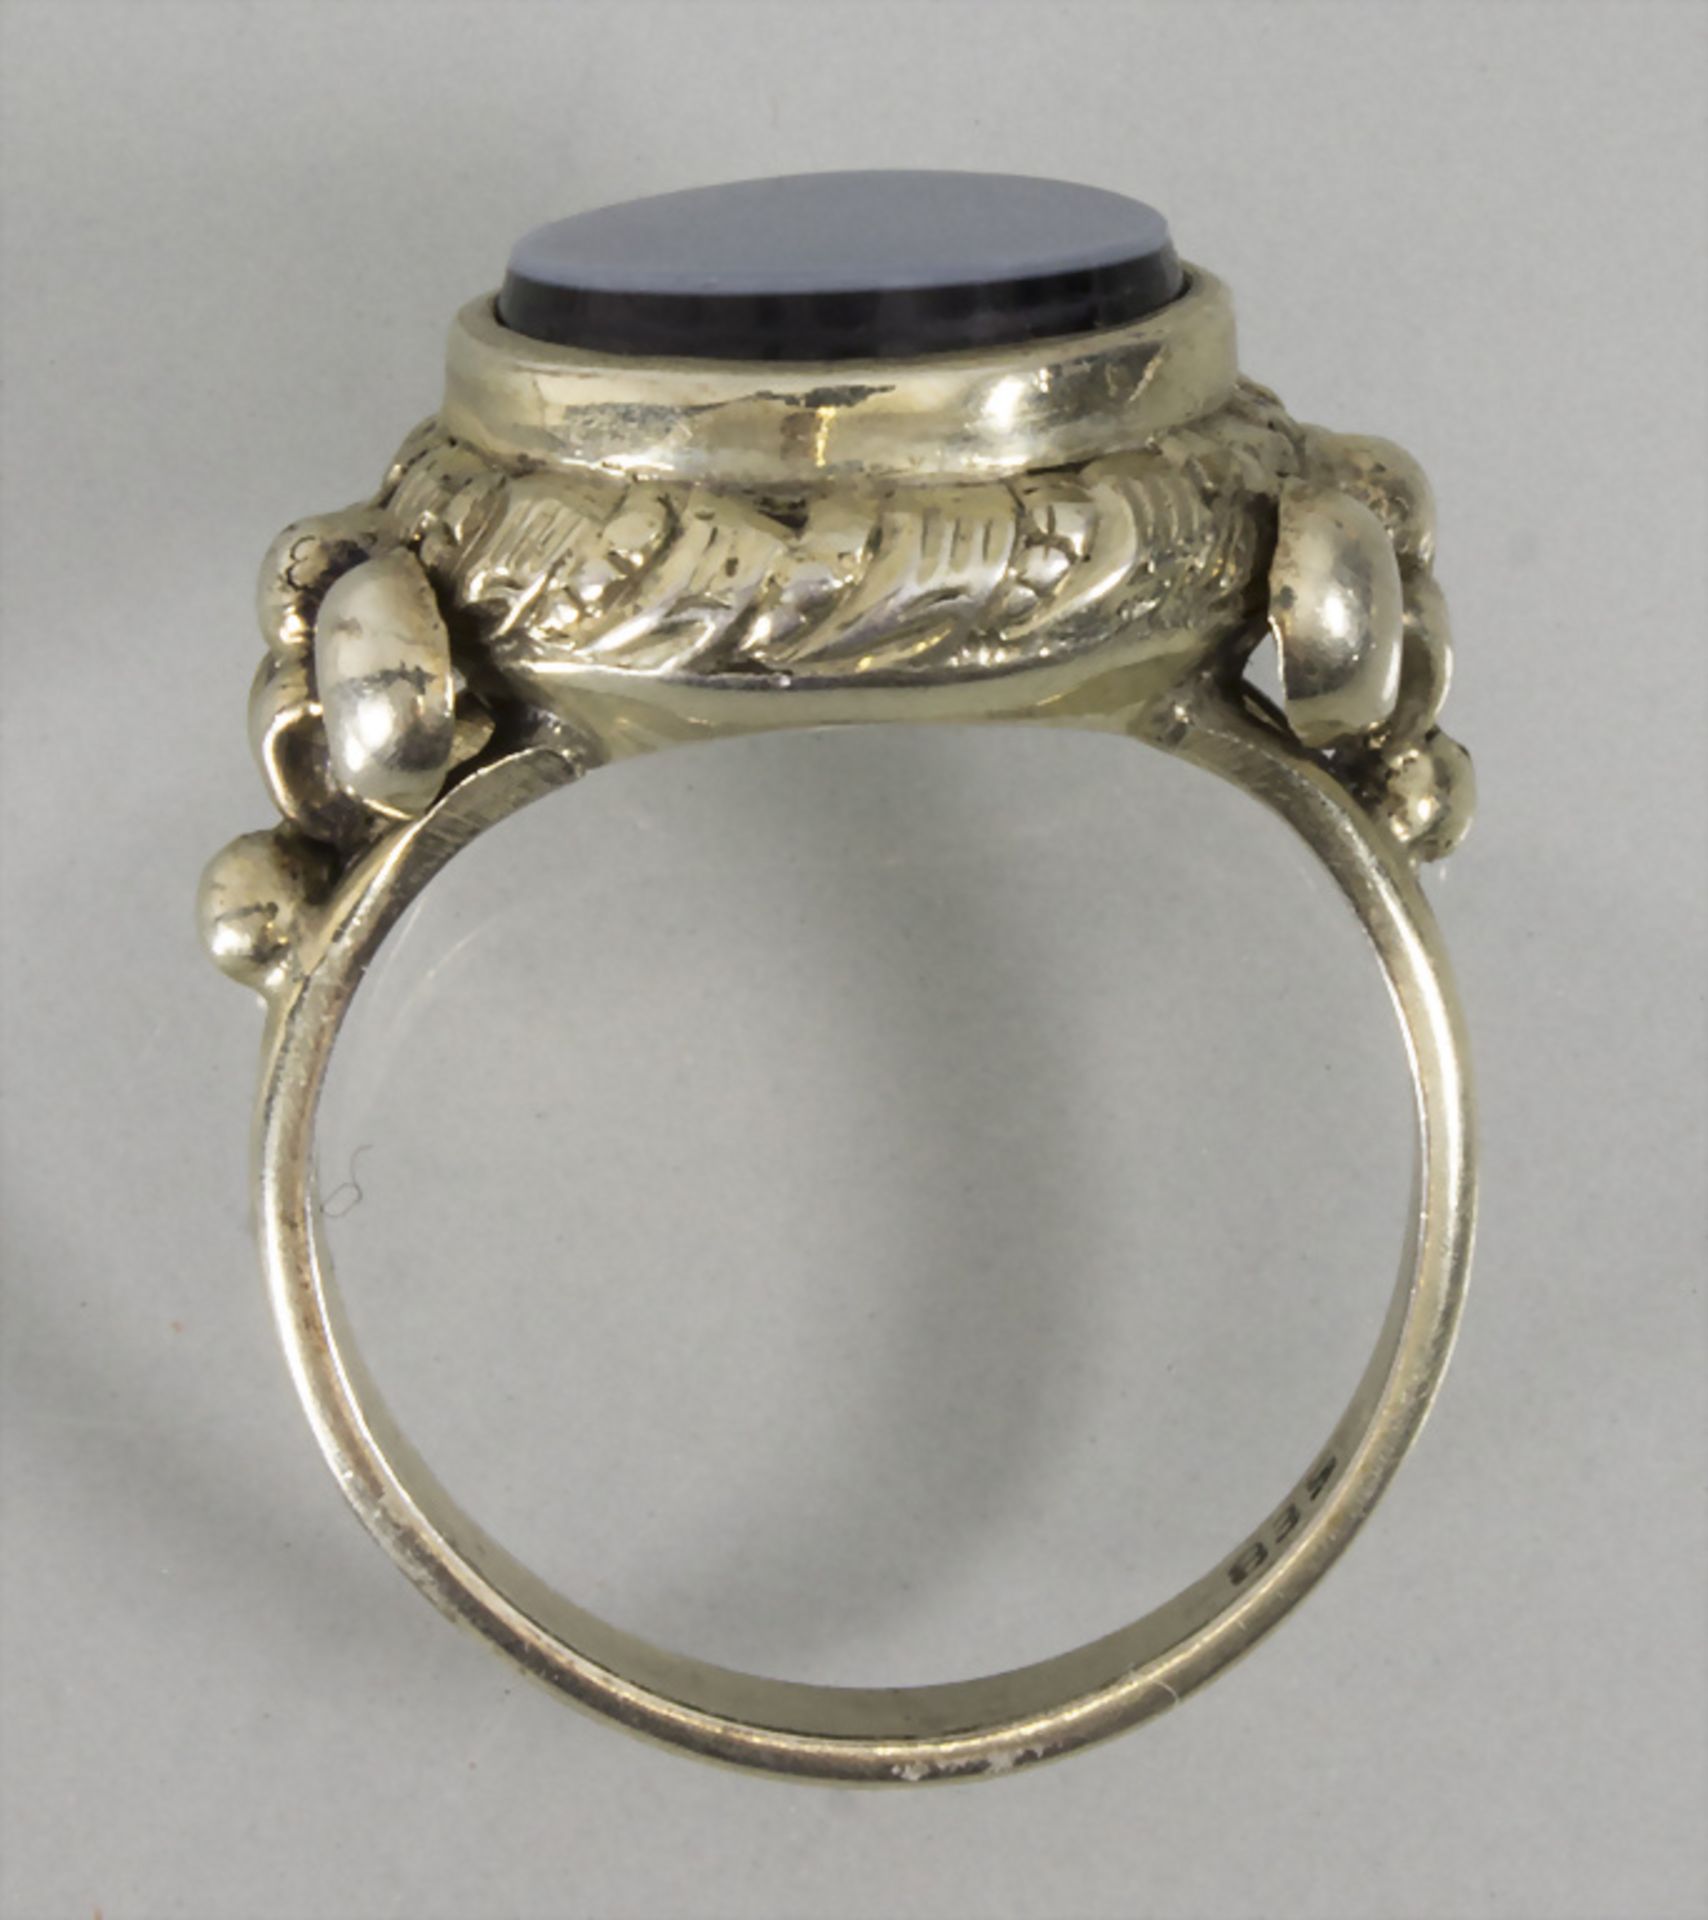 Damenring mit Achat / A gold washed silver ring with agate - Bild 3 aus 3